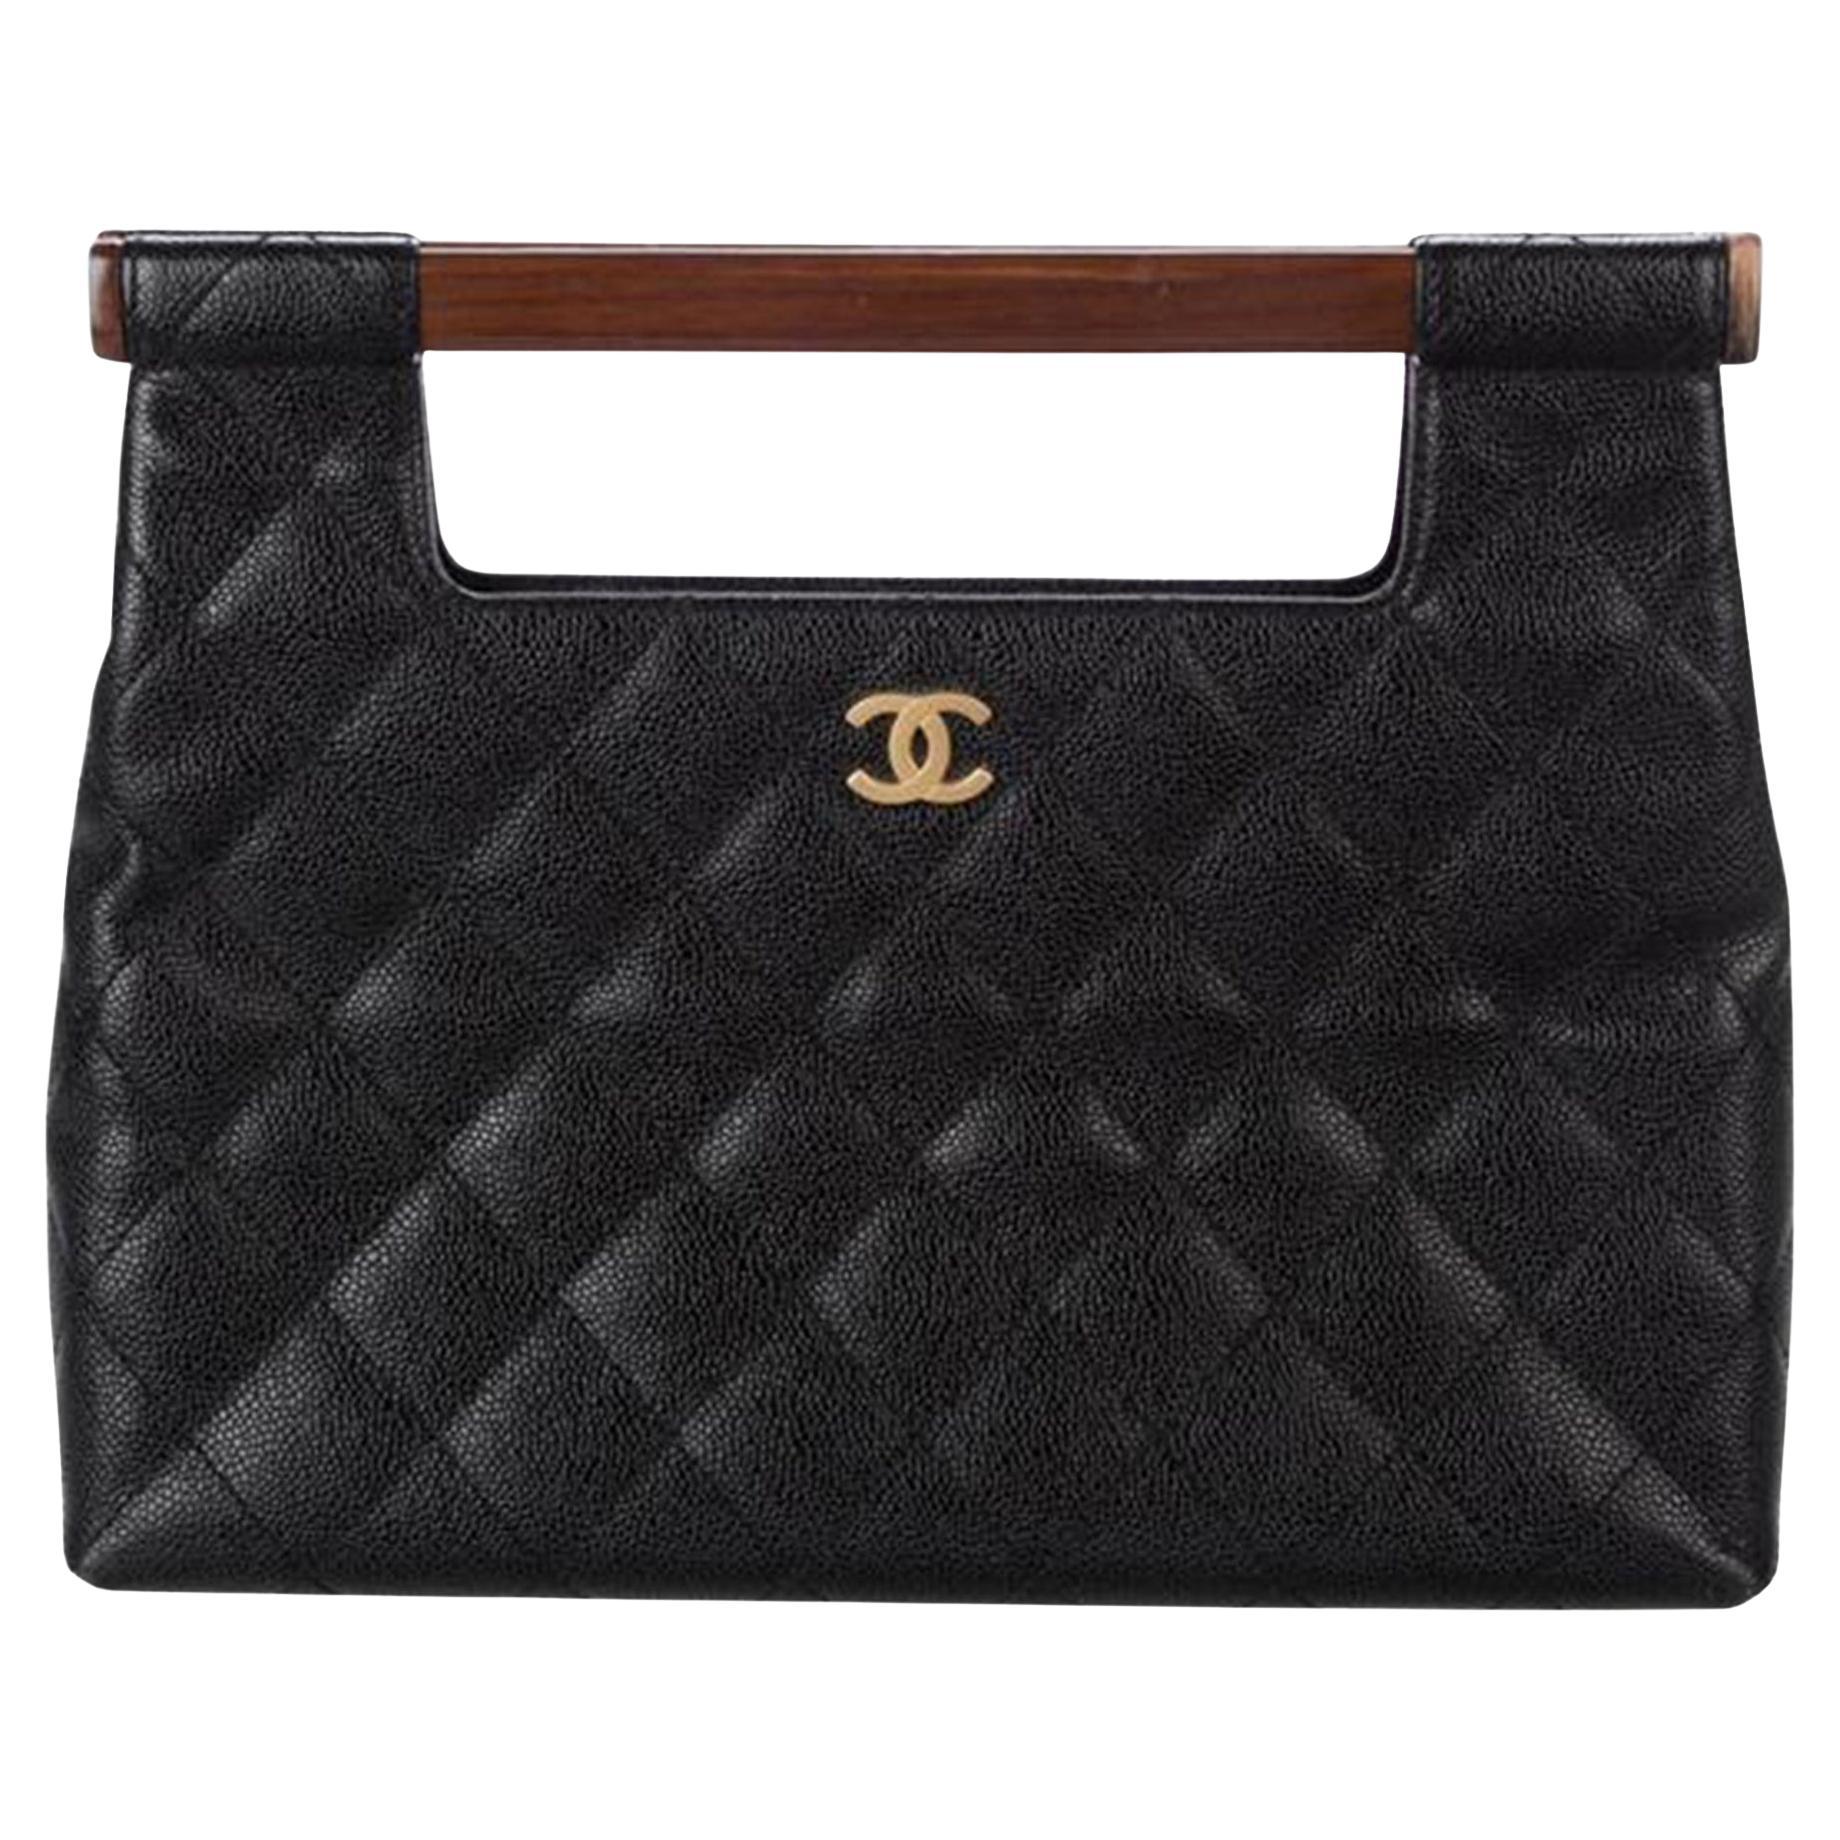 Chanel 2003 Wood Top Handle Kelly Rare Vintage Nero Caviar Leather Clutch Bag